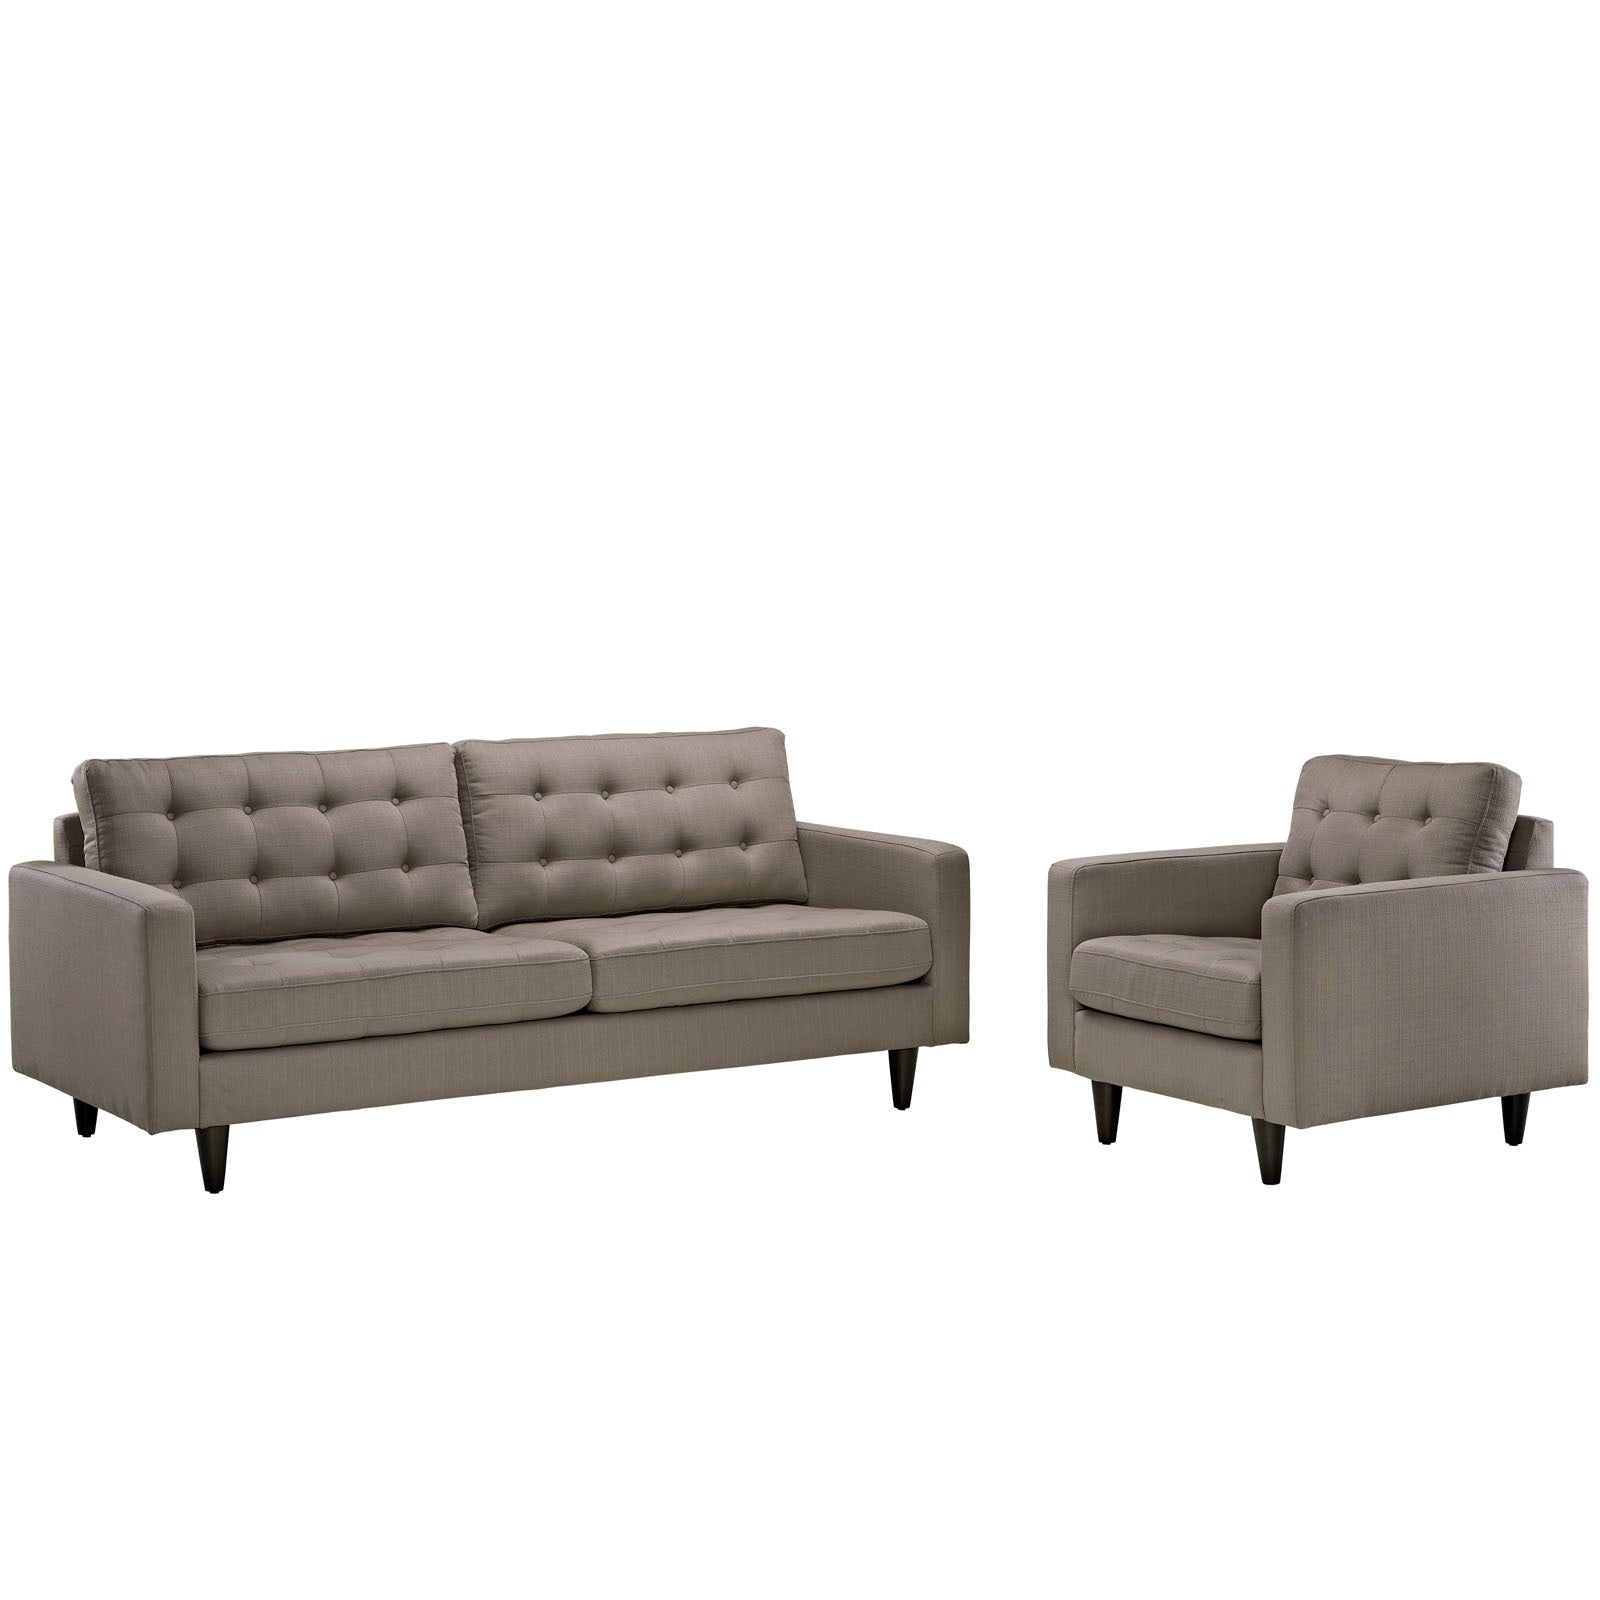 Modway Living Room Sets - Empress Armchair And Sofa Set Of 2 Granite